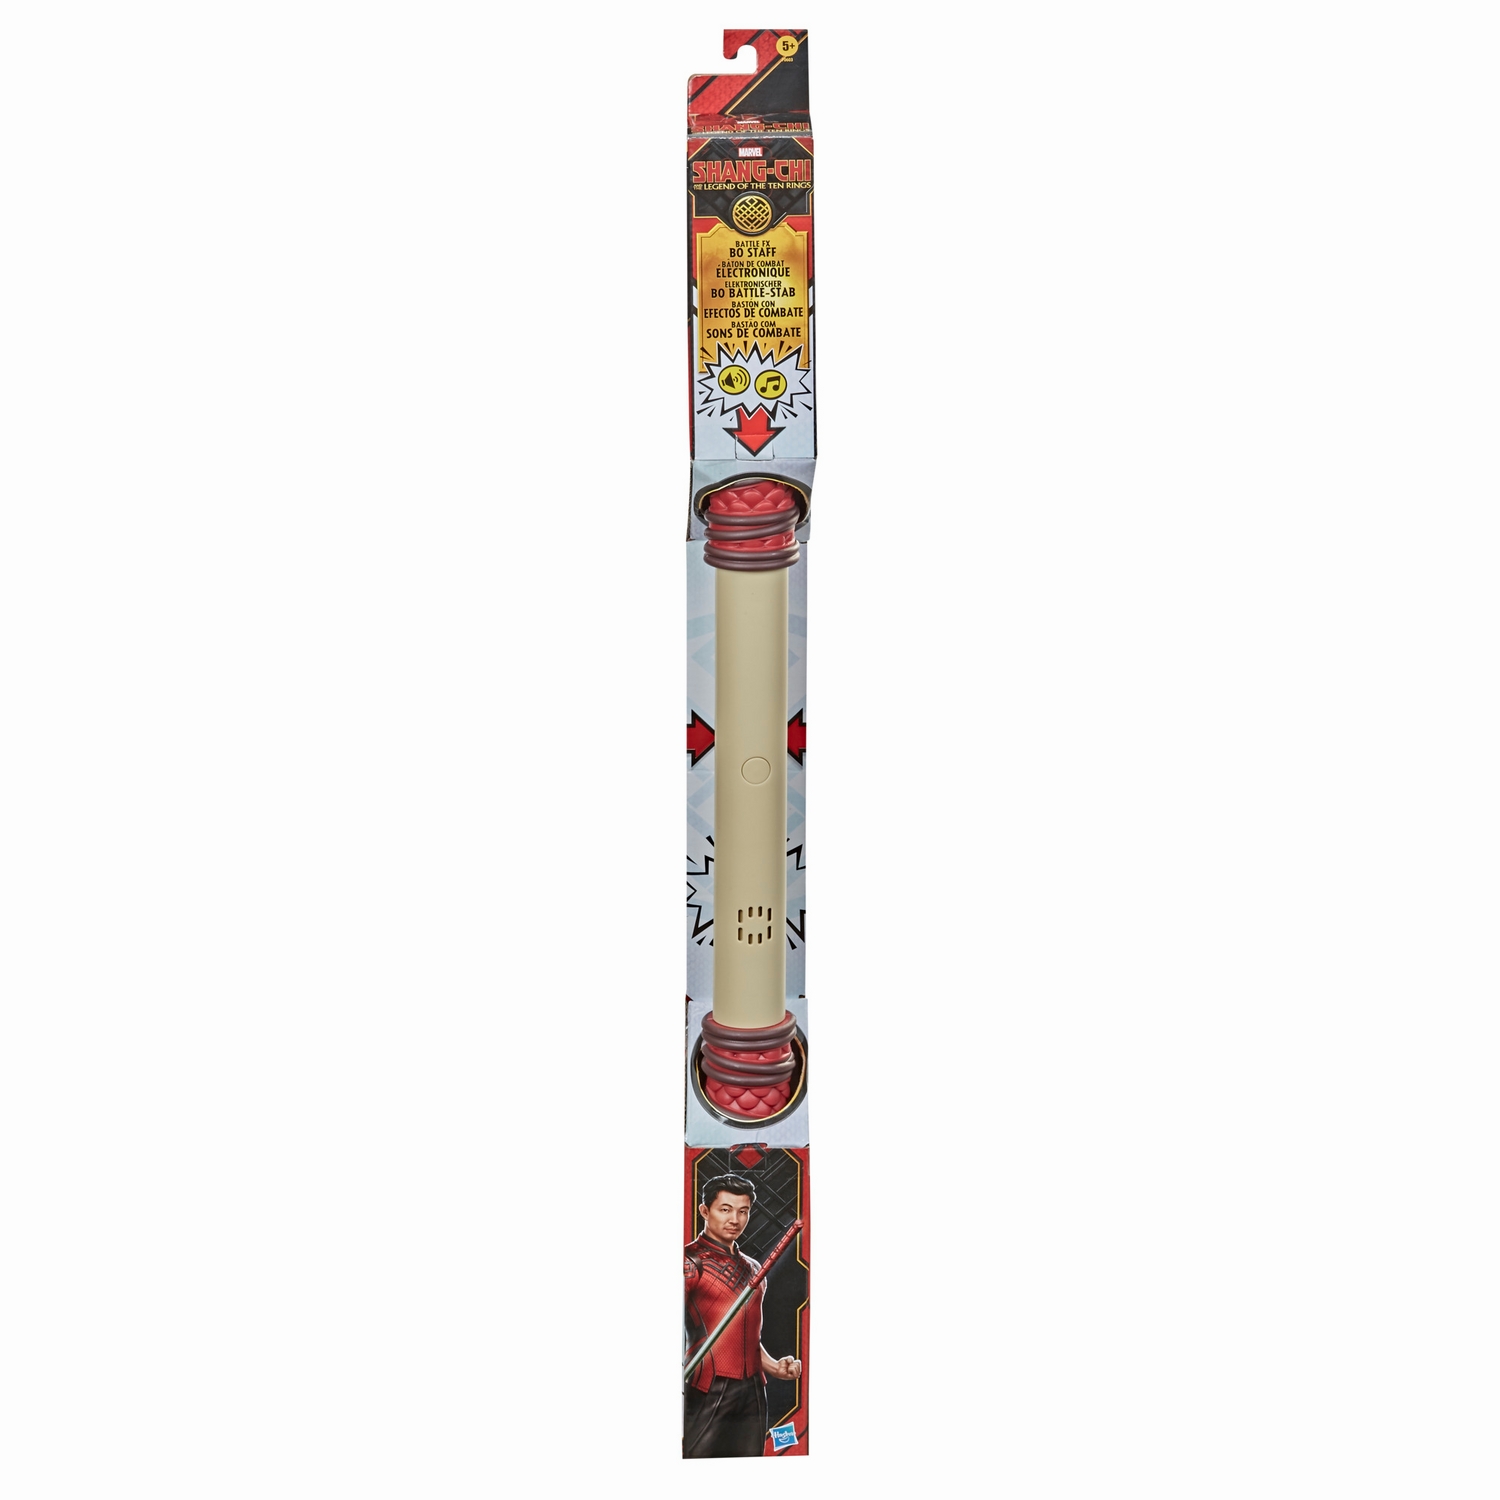 MARVEL SHANG-CHI AND THE LEGEND OF THE TEN RINGS BATTLE FX BO STAFF - pckging(2).jpg